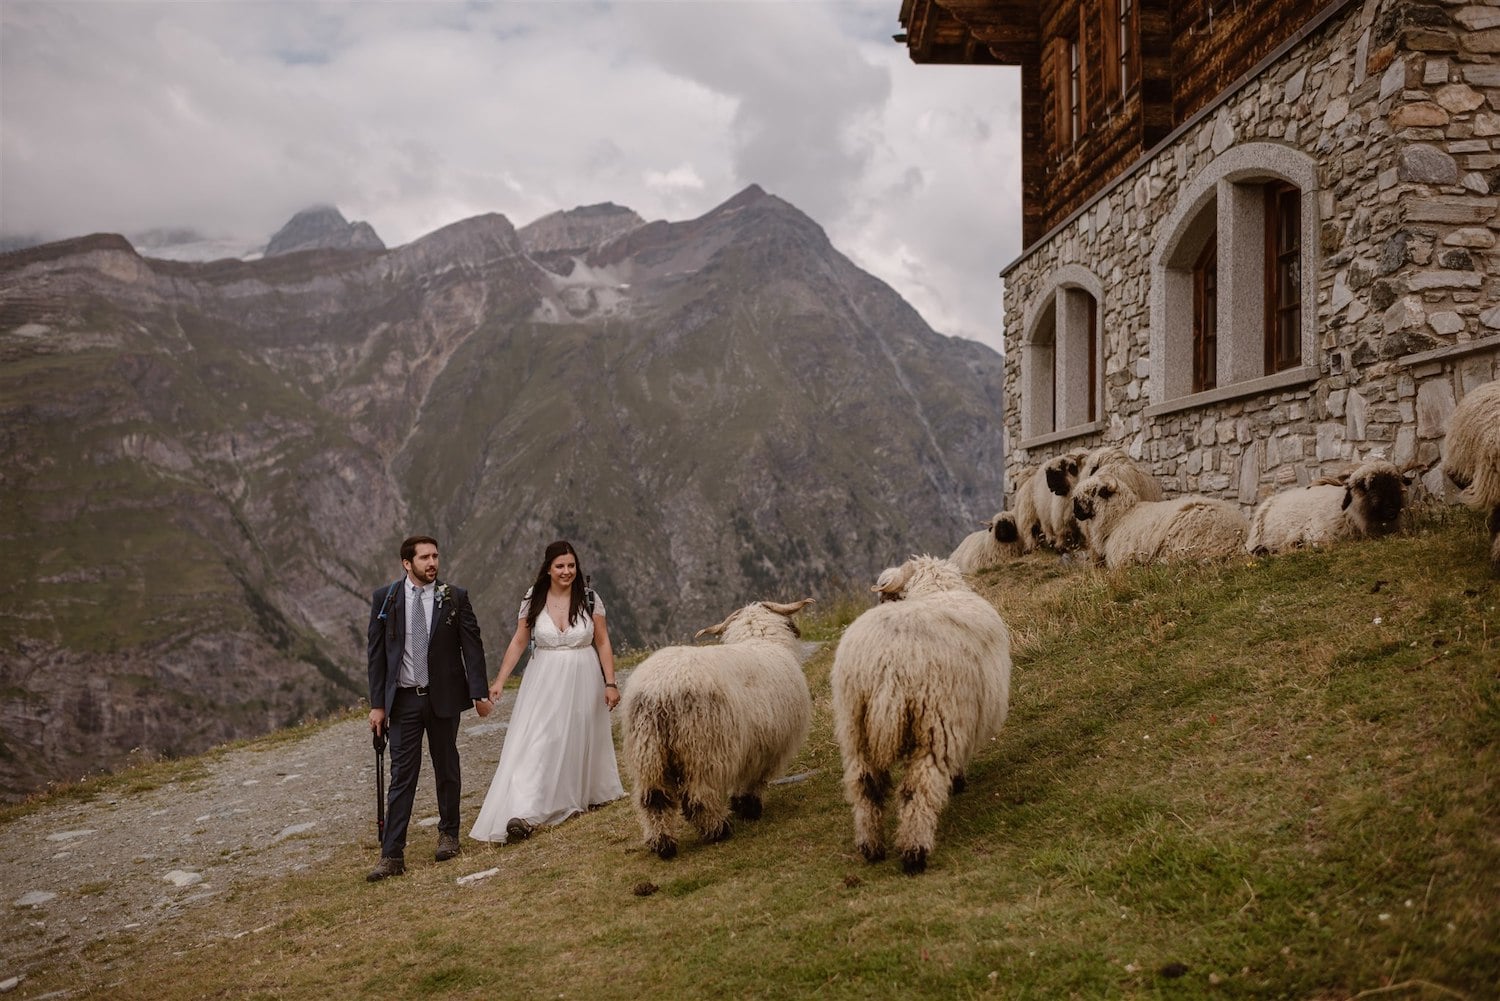 Couple getting married in the Swiss mountains